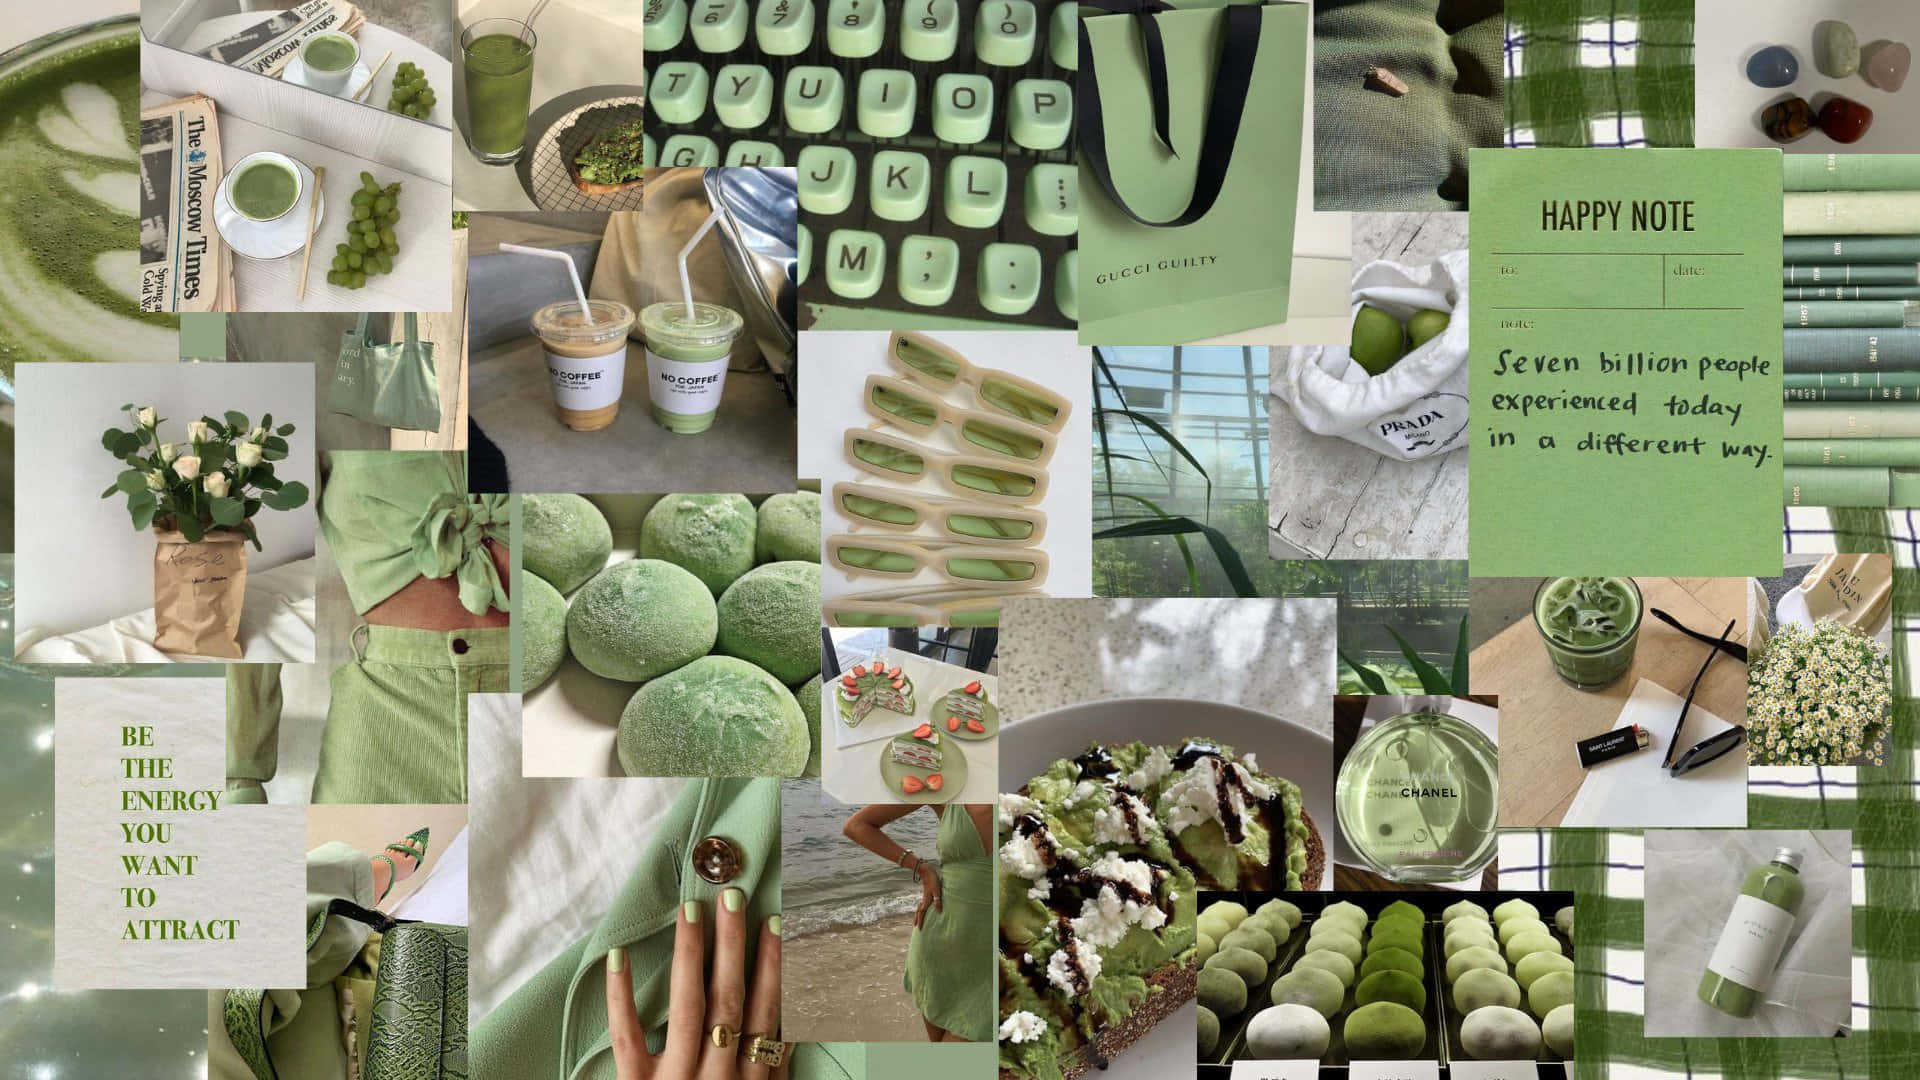 “A vibrant and creative green collage of natural elements” Wallpaper